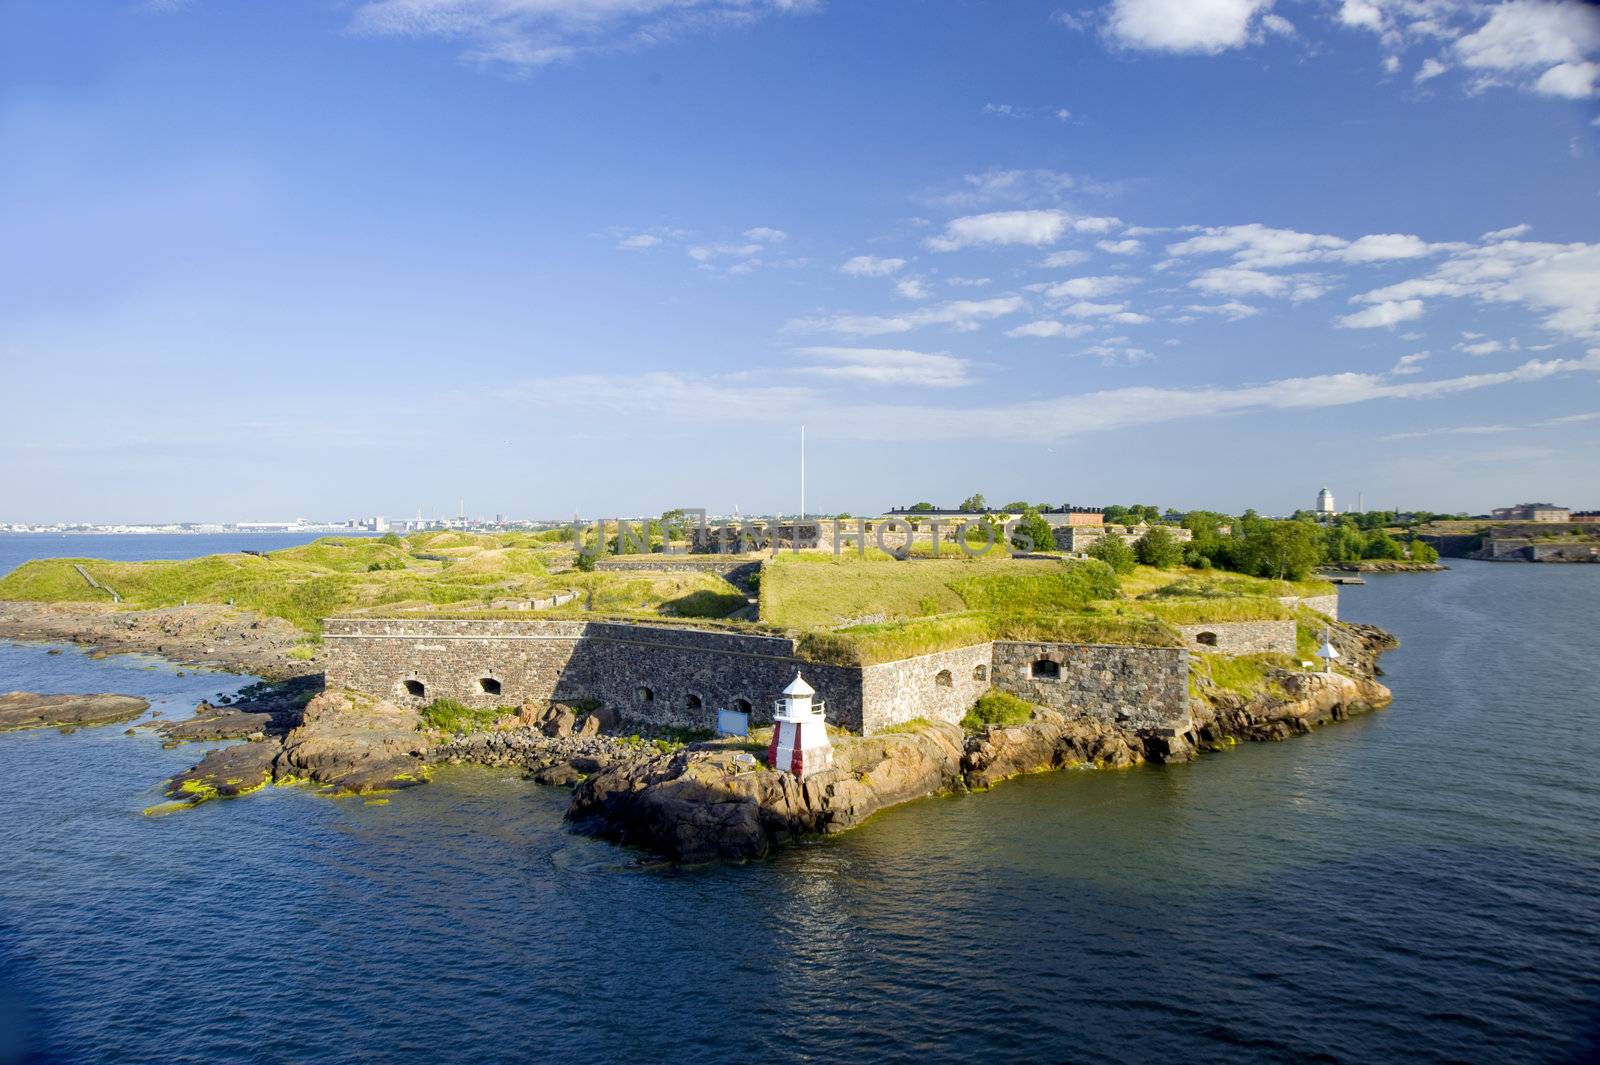 Sveaborg fortress by Alenmax